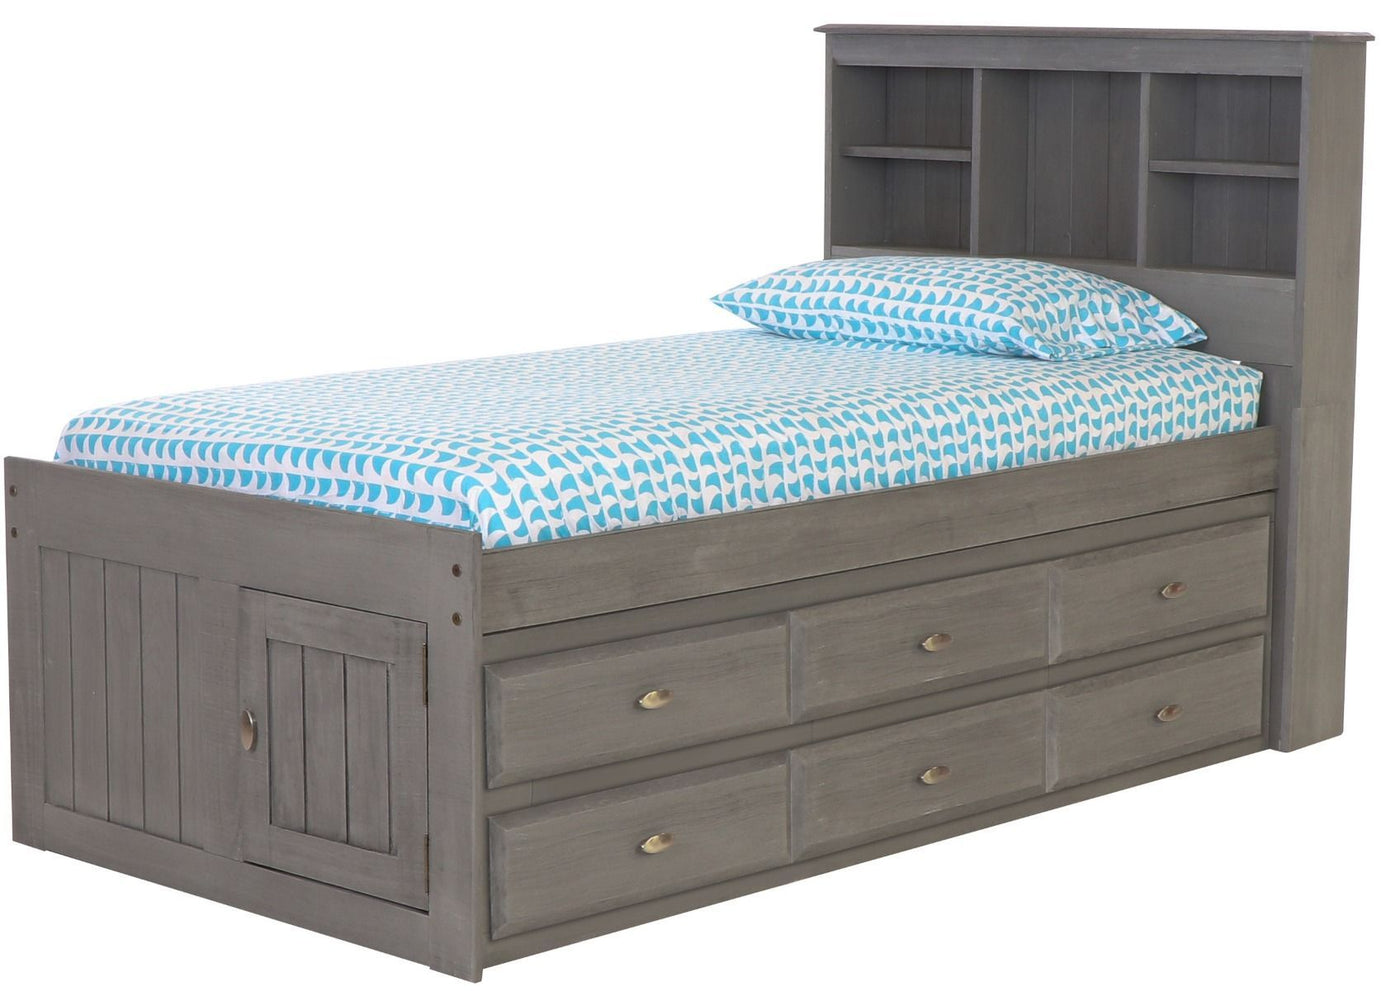 DISCOVERY WORLD FURNITURE CHARCOAL TWIN SIZE BOOKCASE CAPTAINS BED drawer storage and bottom twin trundle bed